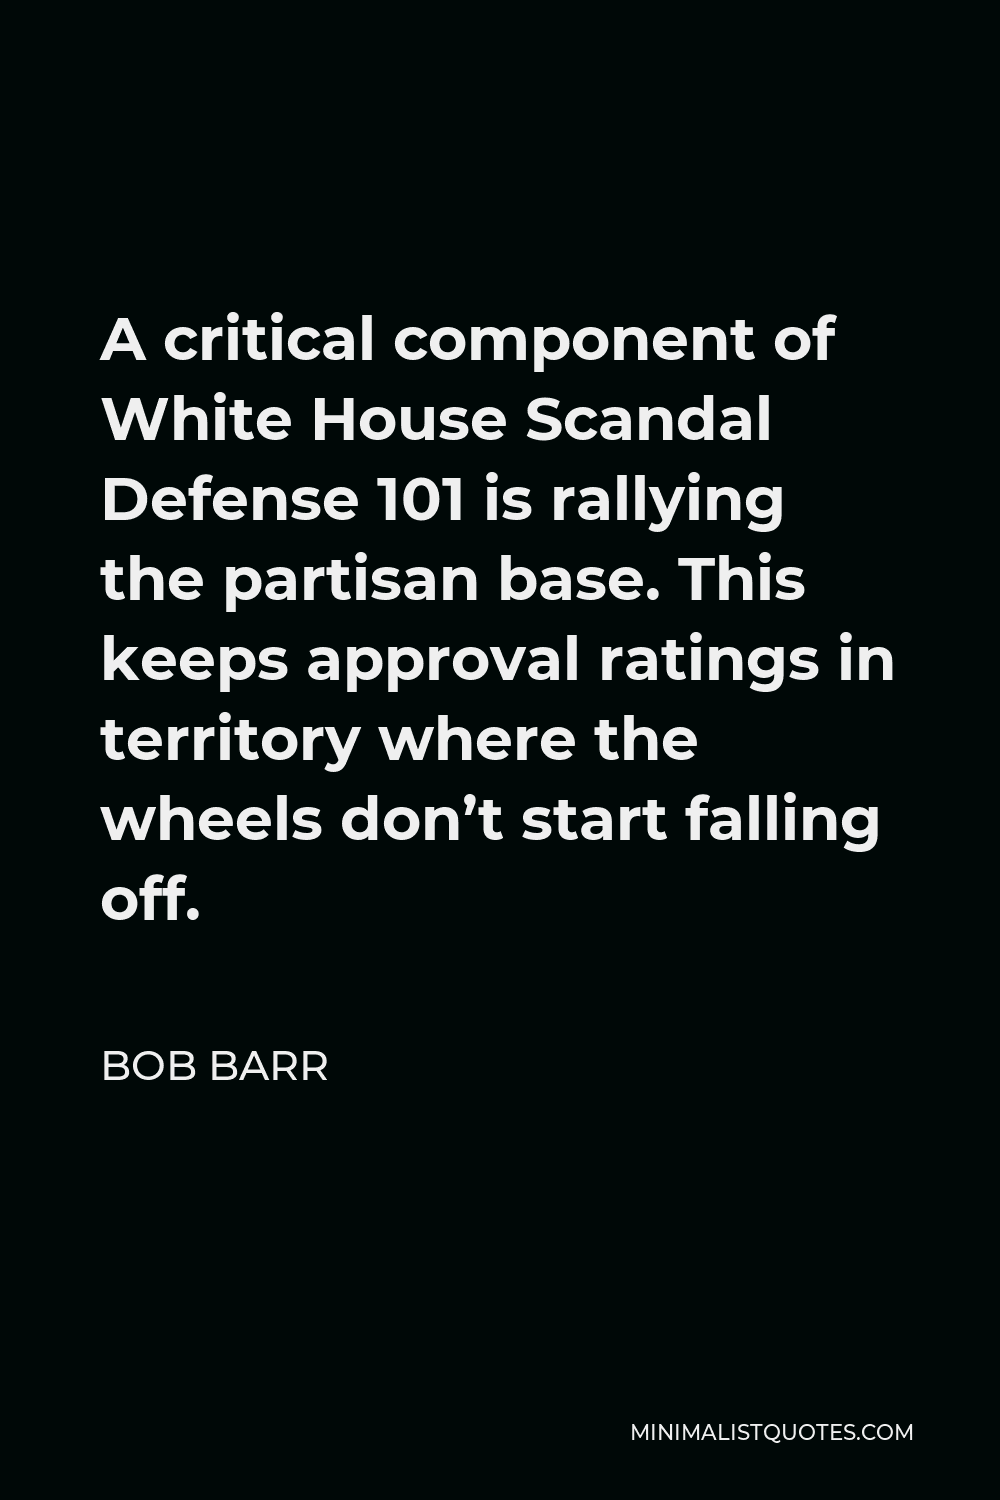 Bob Barr Quote - A critical component of White House Scandal Defense 101 is rallying the partisan base. This keeps approval ratings in territory where the wheels don’t start falling off.